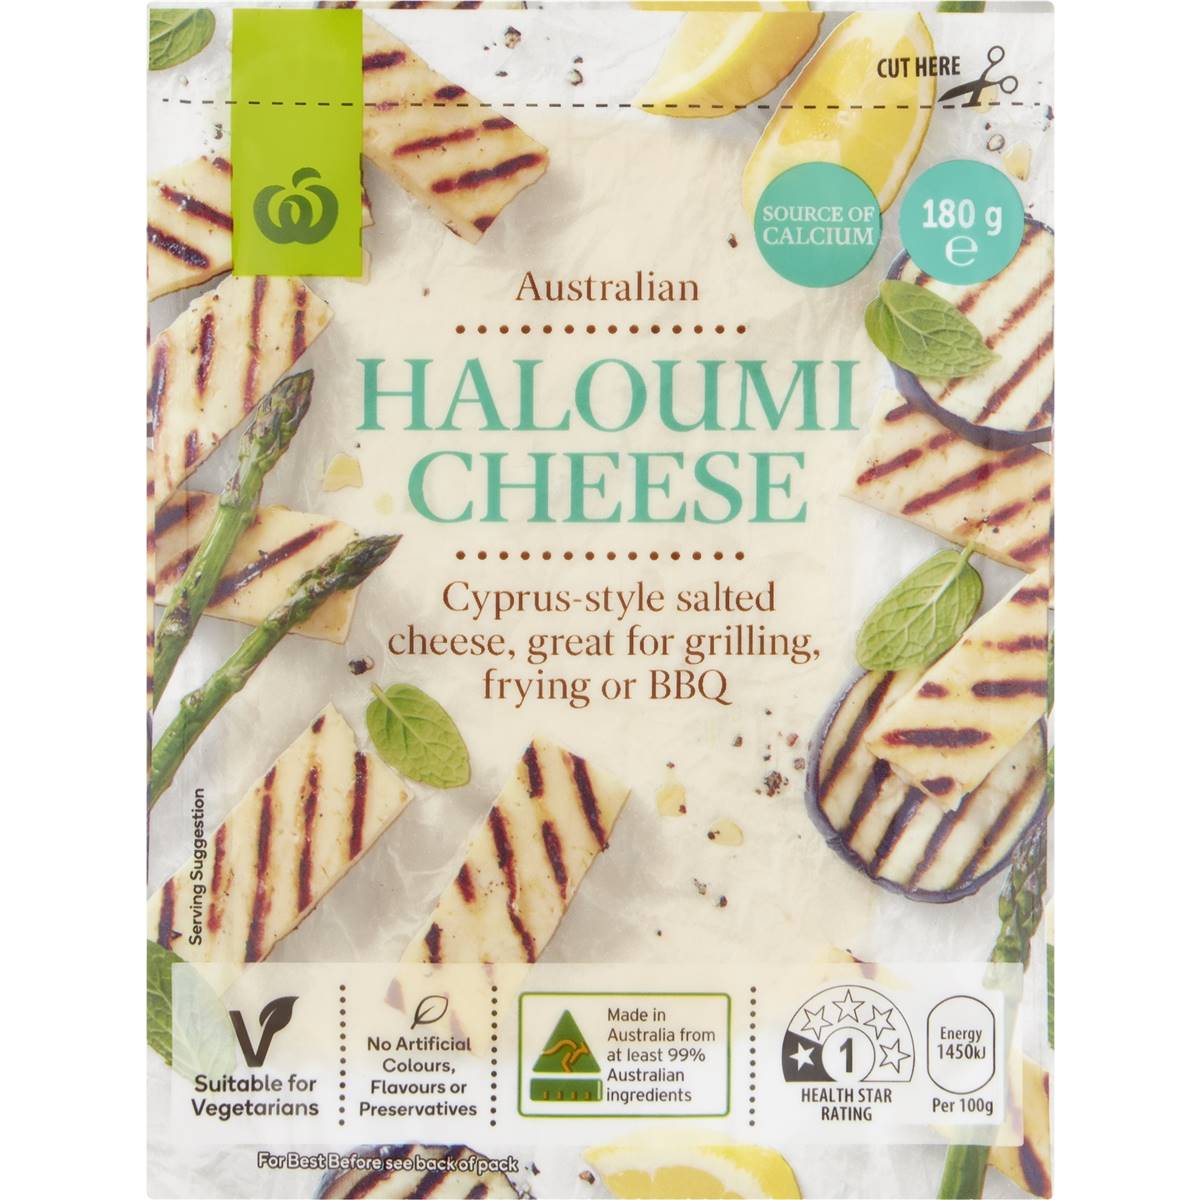 Calories in Woolworths Haloumi